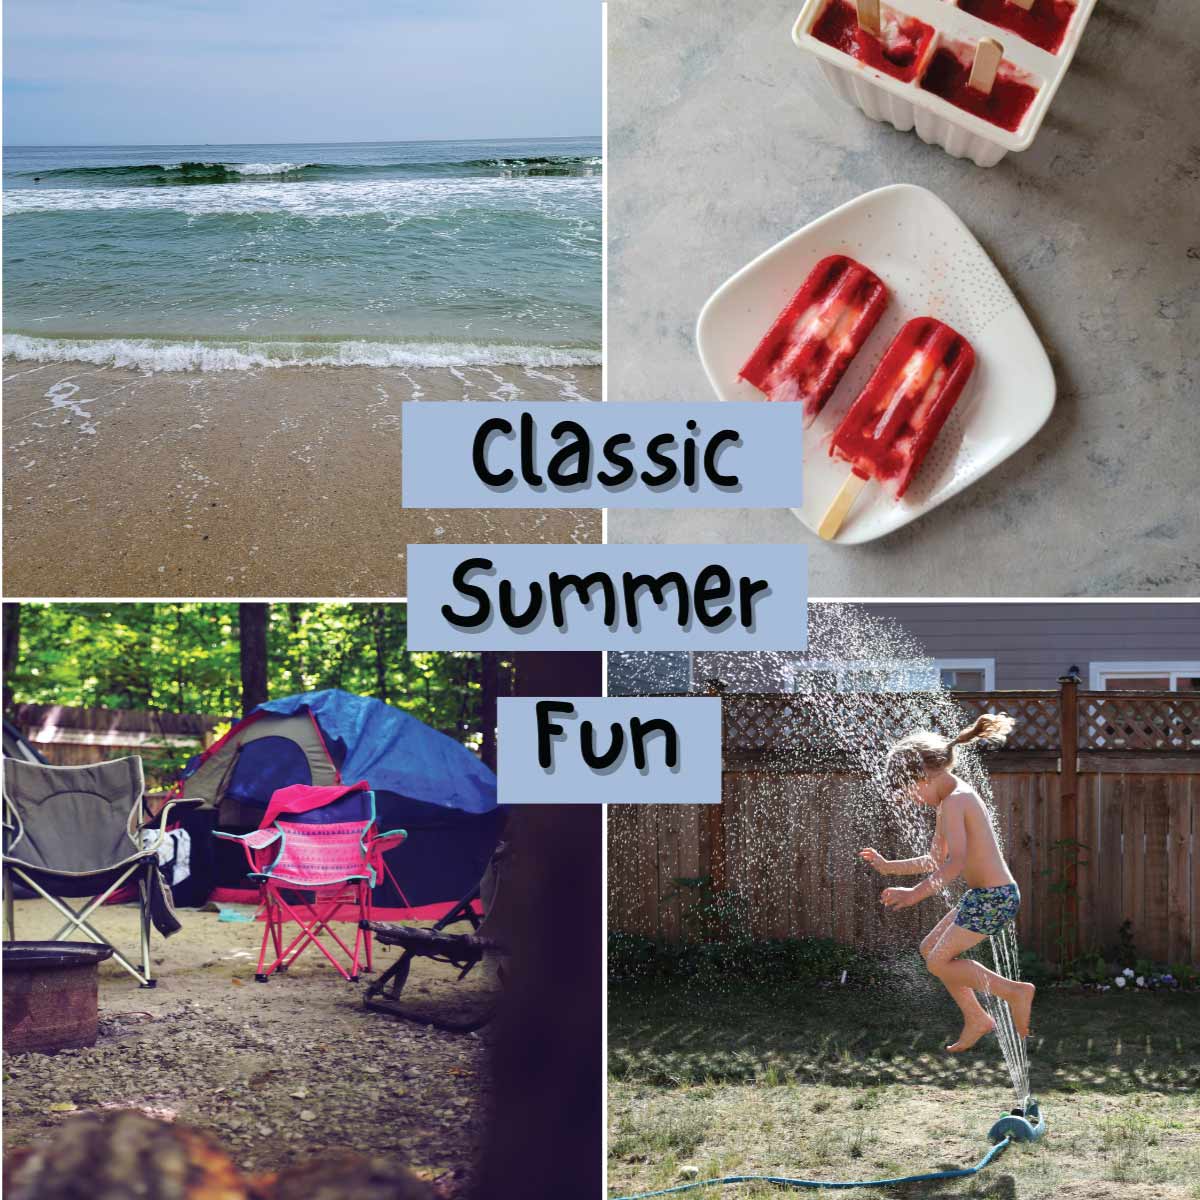 Classic Summertime Activities Your Kids Will Love